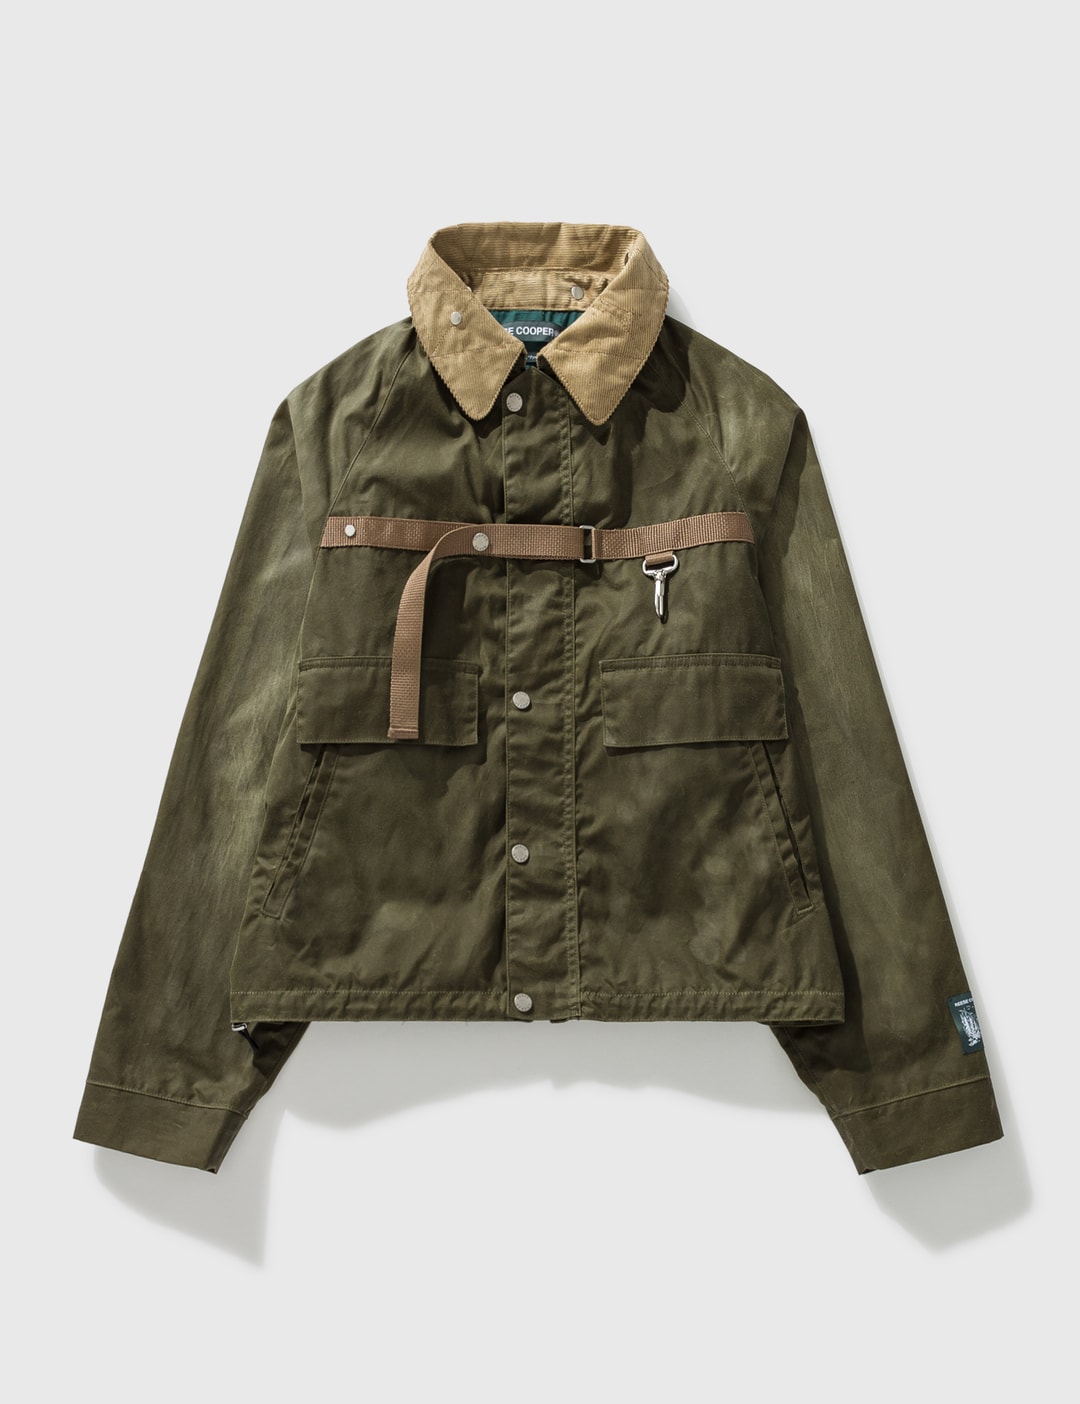 Reese Cooper - Cropped Waxed Cotton Hunting Jacket | HBX - Globally Curated  Fashion and Lifestyle by Hypebeast